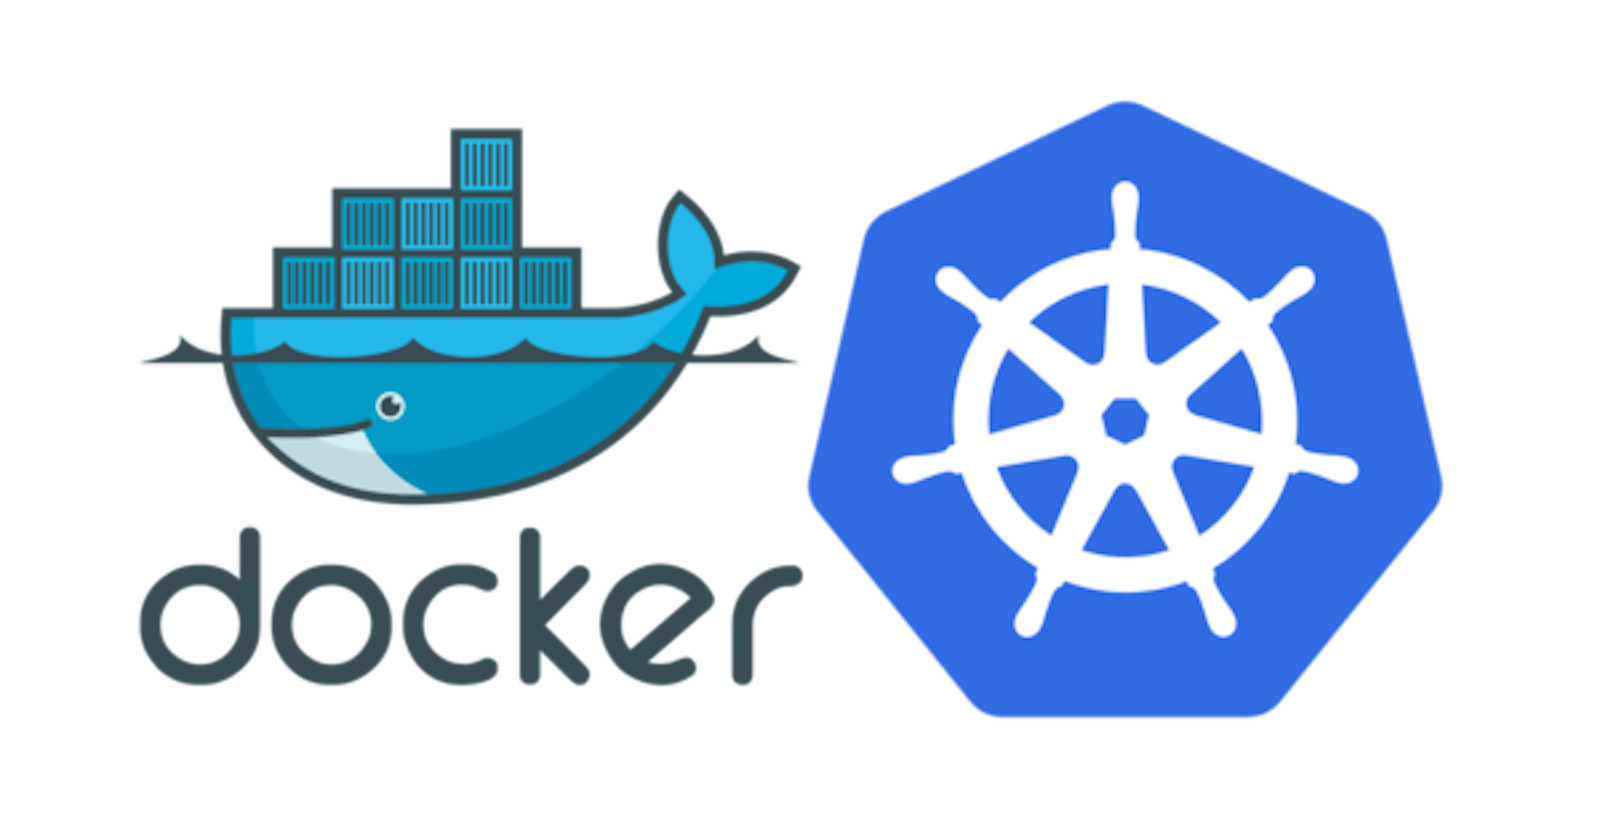 Containerize your machine learning model
with Docker and running it on Kubernetes-
Part 1